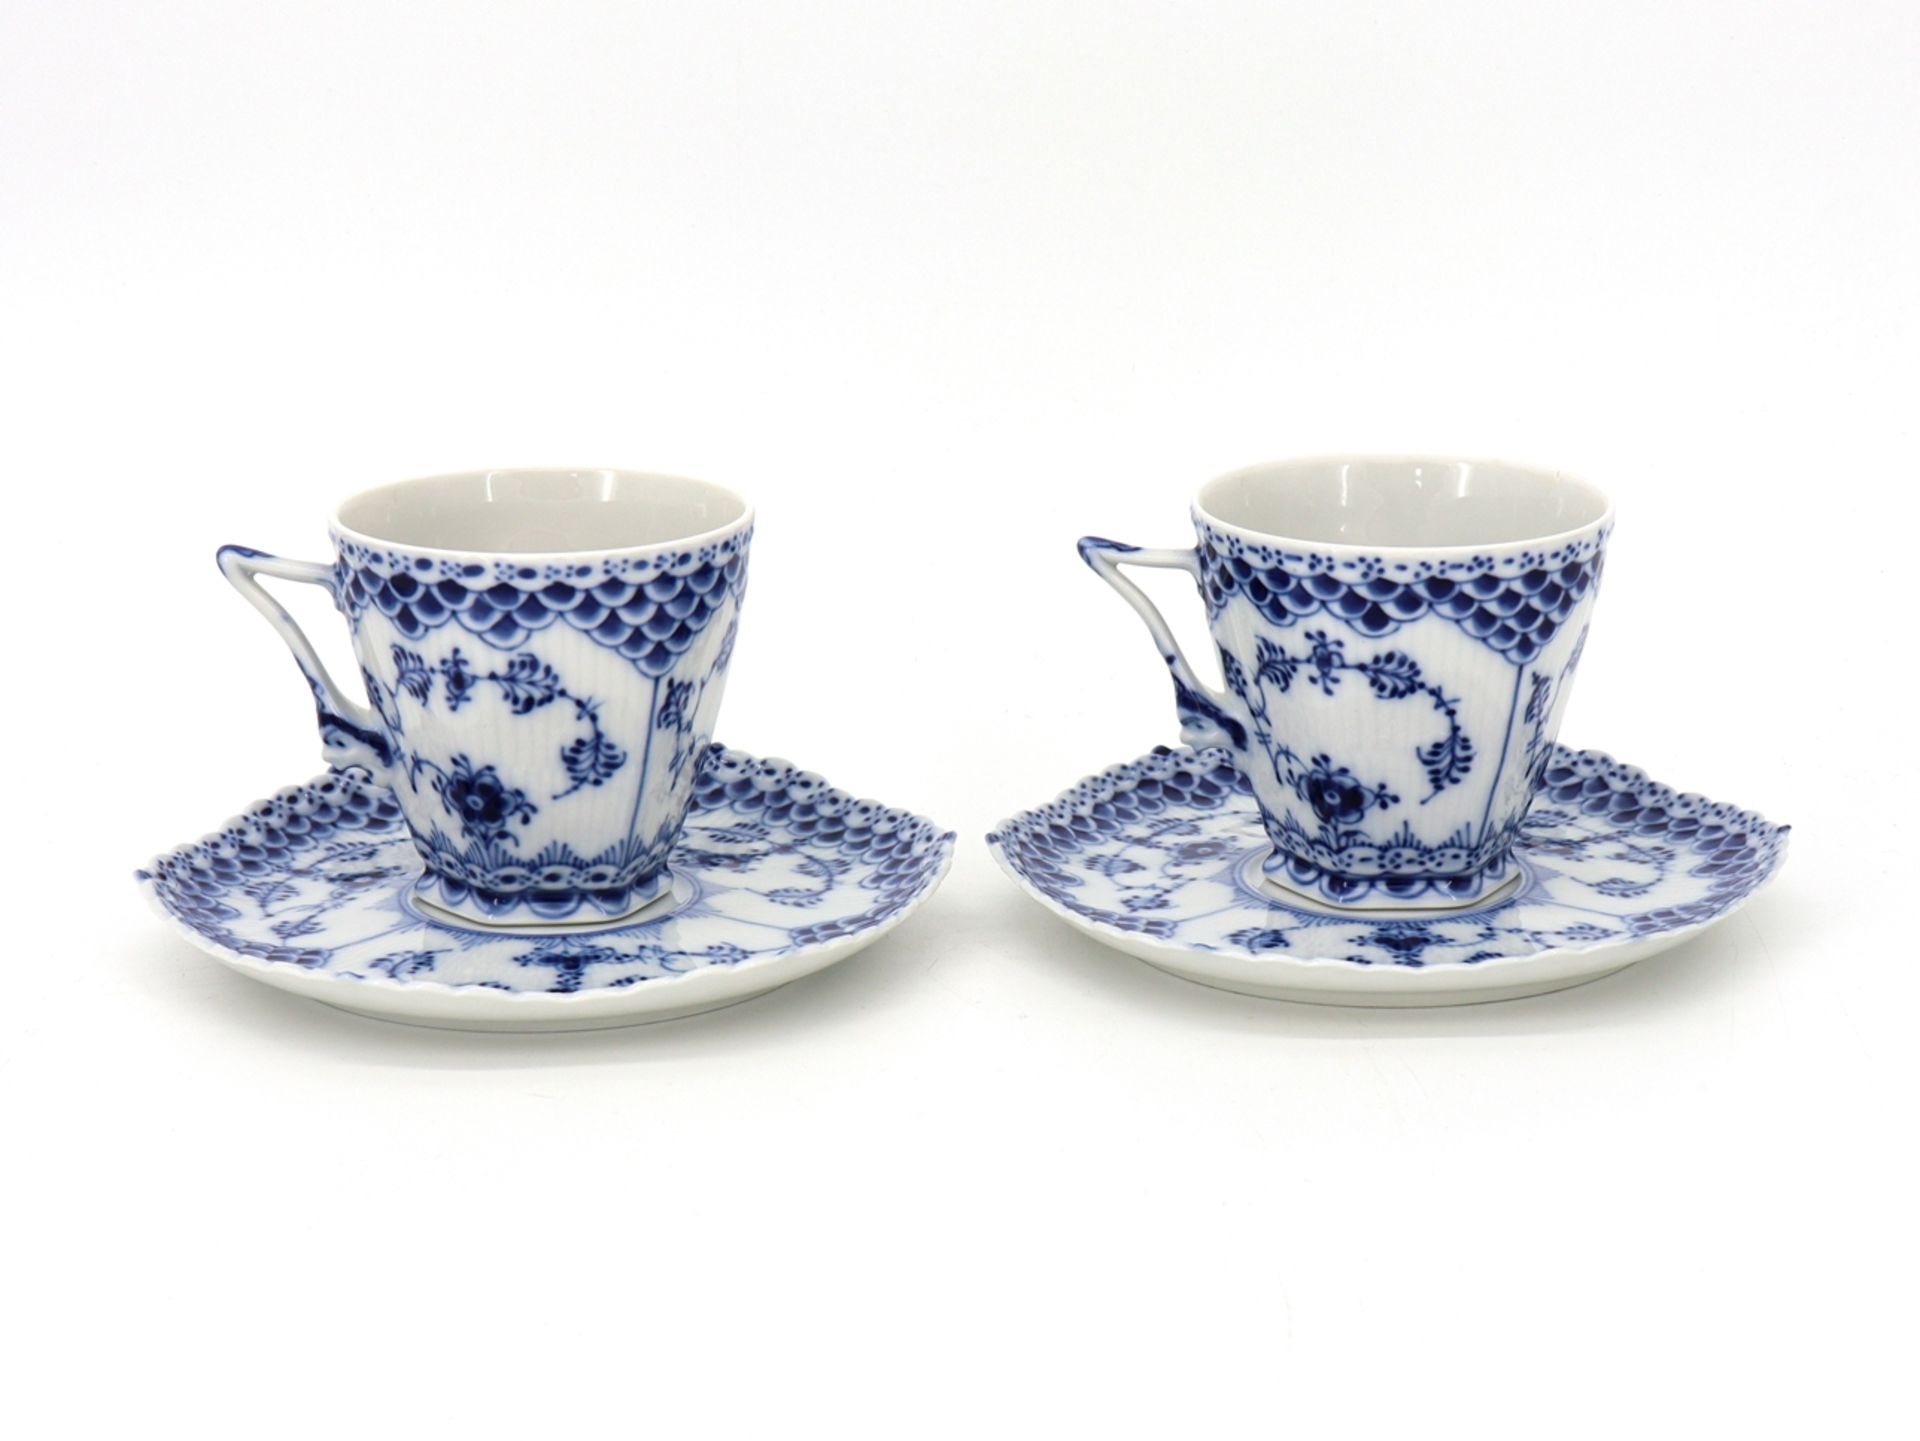 2 Royal Copenhagen Musselmalet Full Point Coffee Cups, No.: 1036 - Image 6 of 6